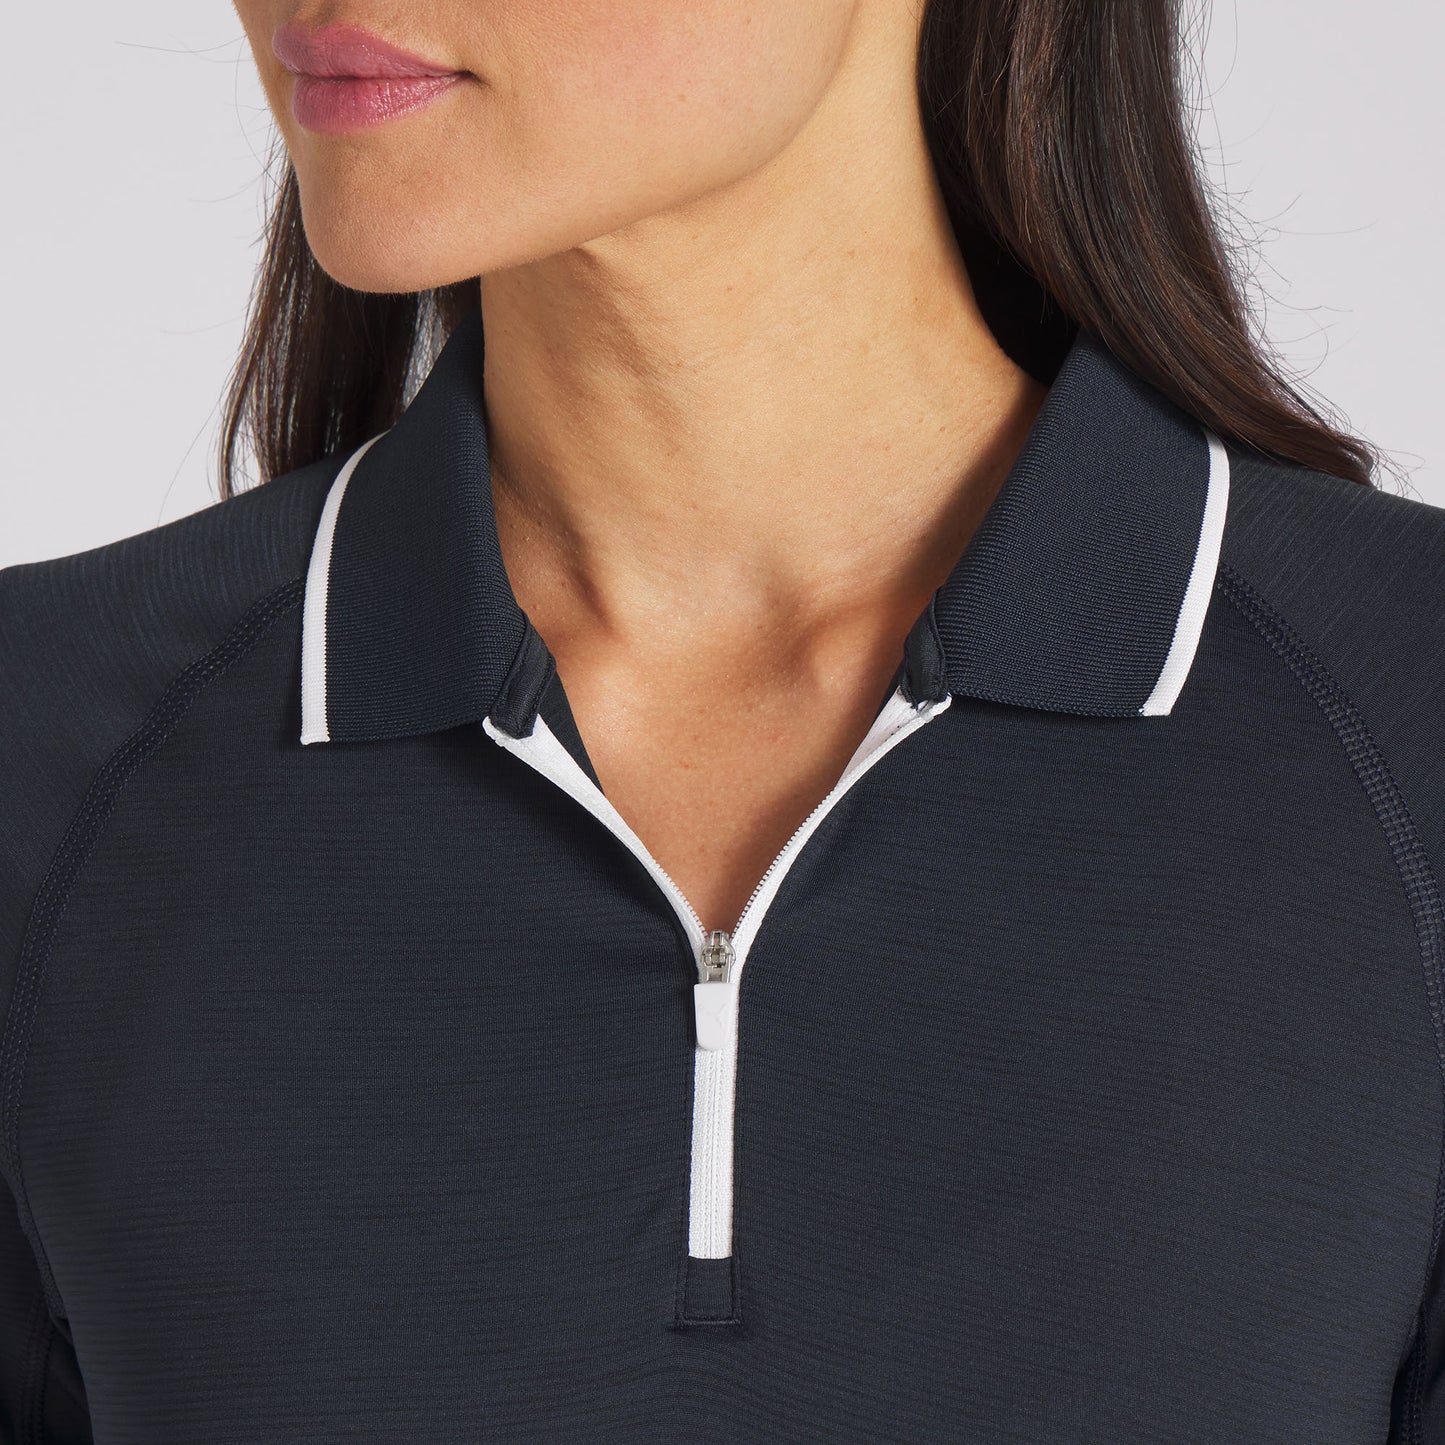 Puma Ladies Deep Navy You-V Long Sleeve Zip-Neck Top with UPF 50+